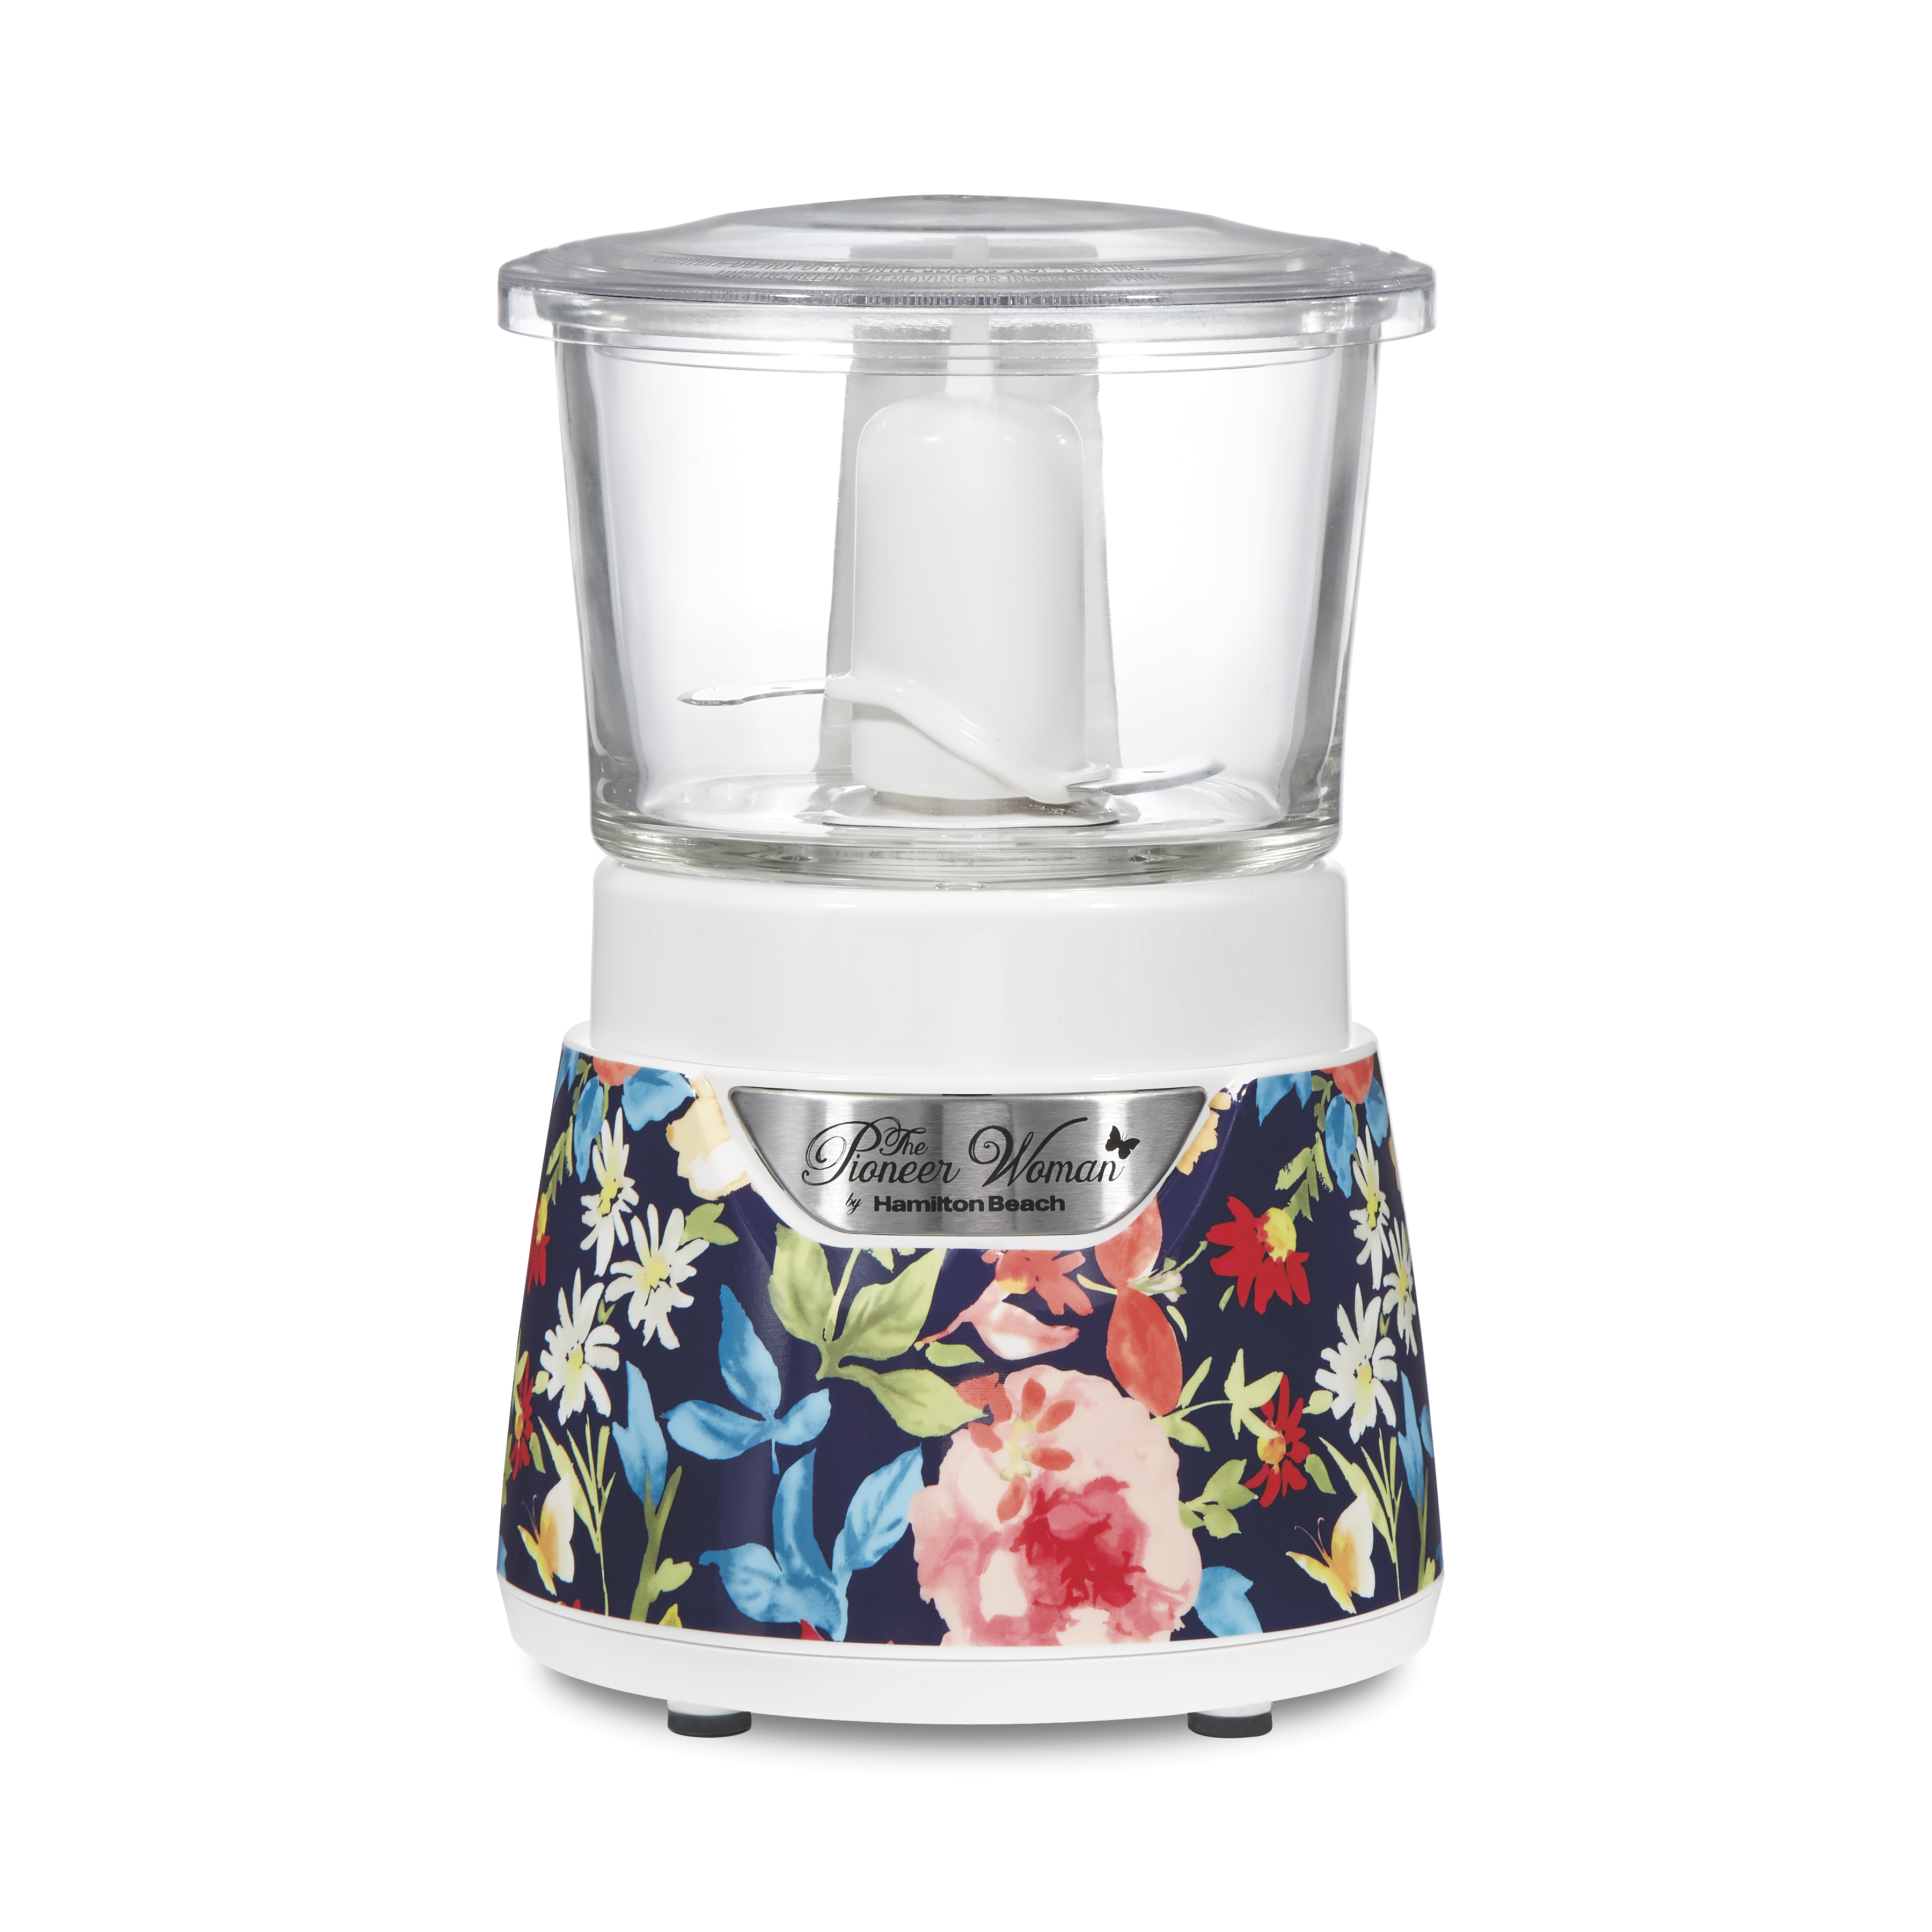 The Pioneer Woman Fiona Floral Stack & Press Glass Bowl Food Chopper, 3 Cup Capacity - image 1 of 5